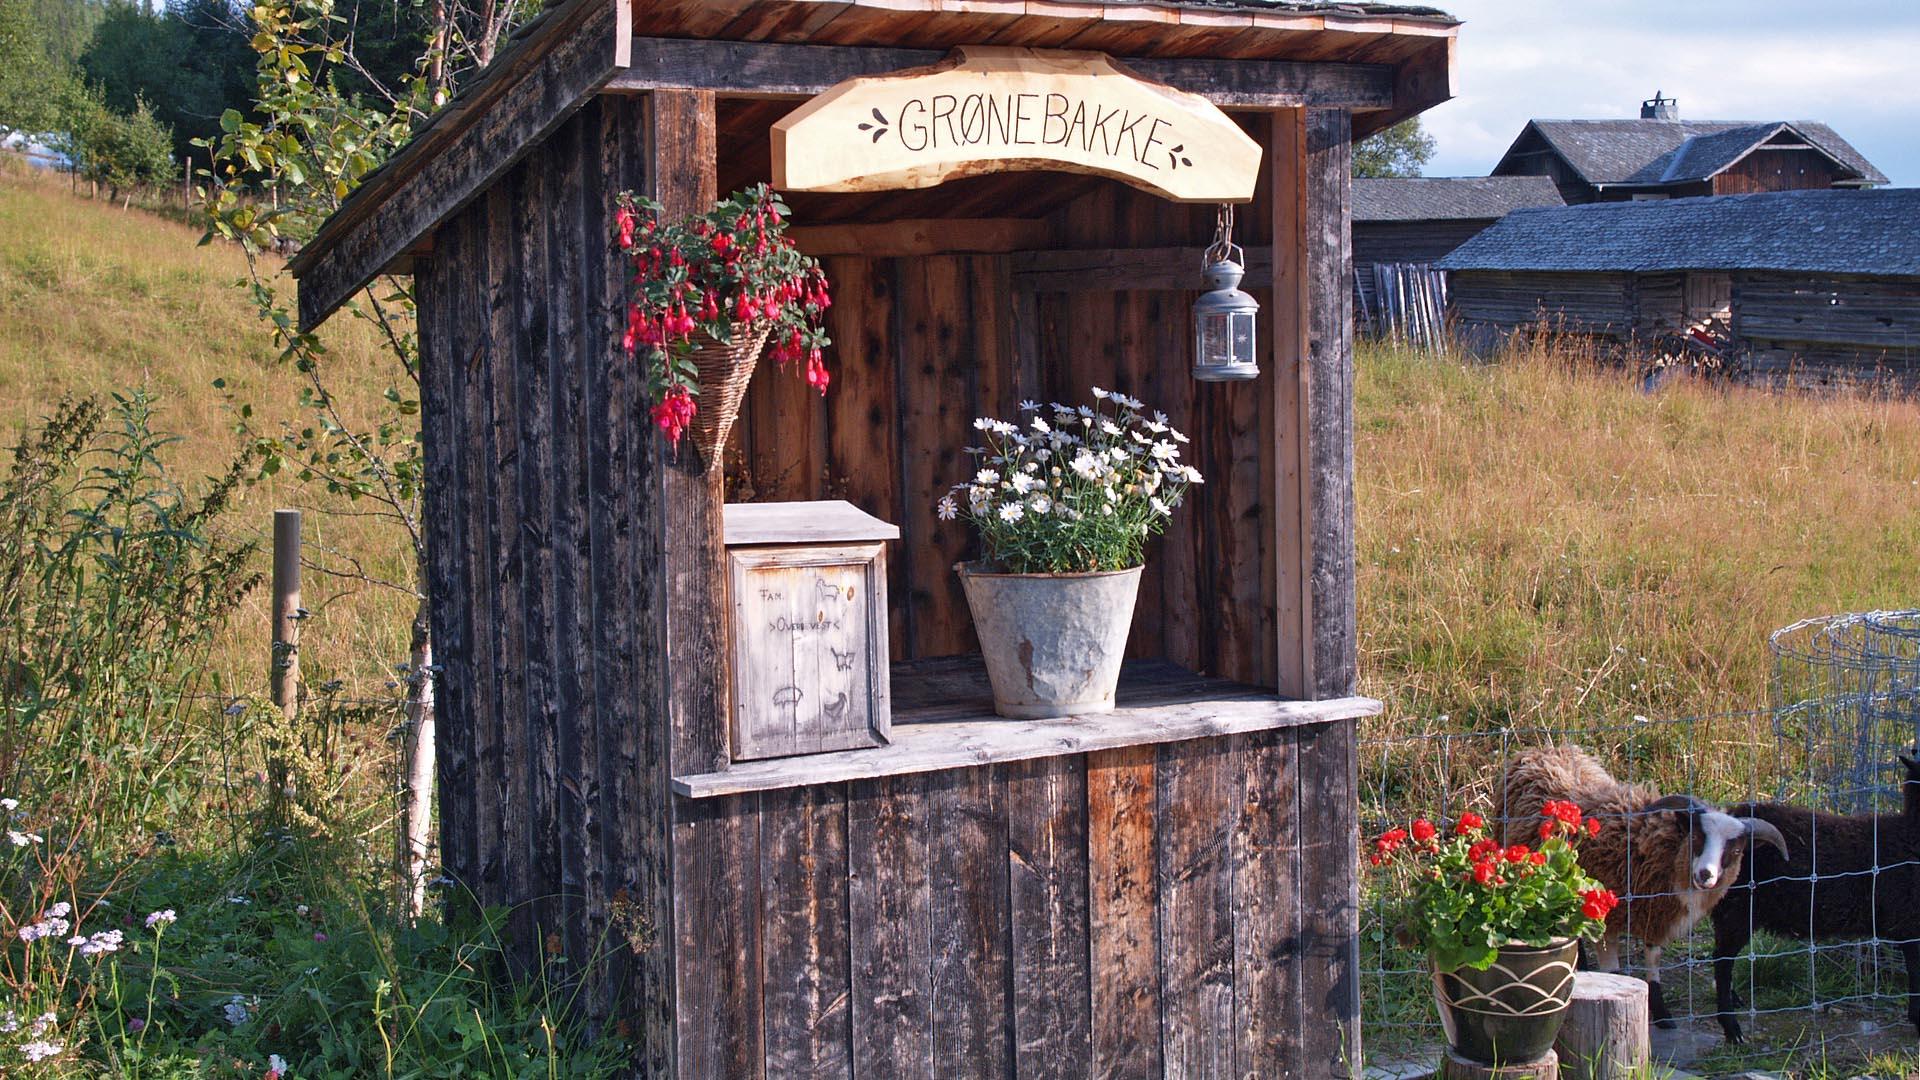 An old-fashioned milk ramp at the gateway to a farm, decorated with flower pots.